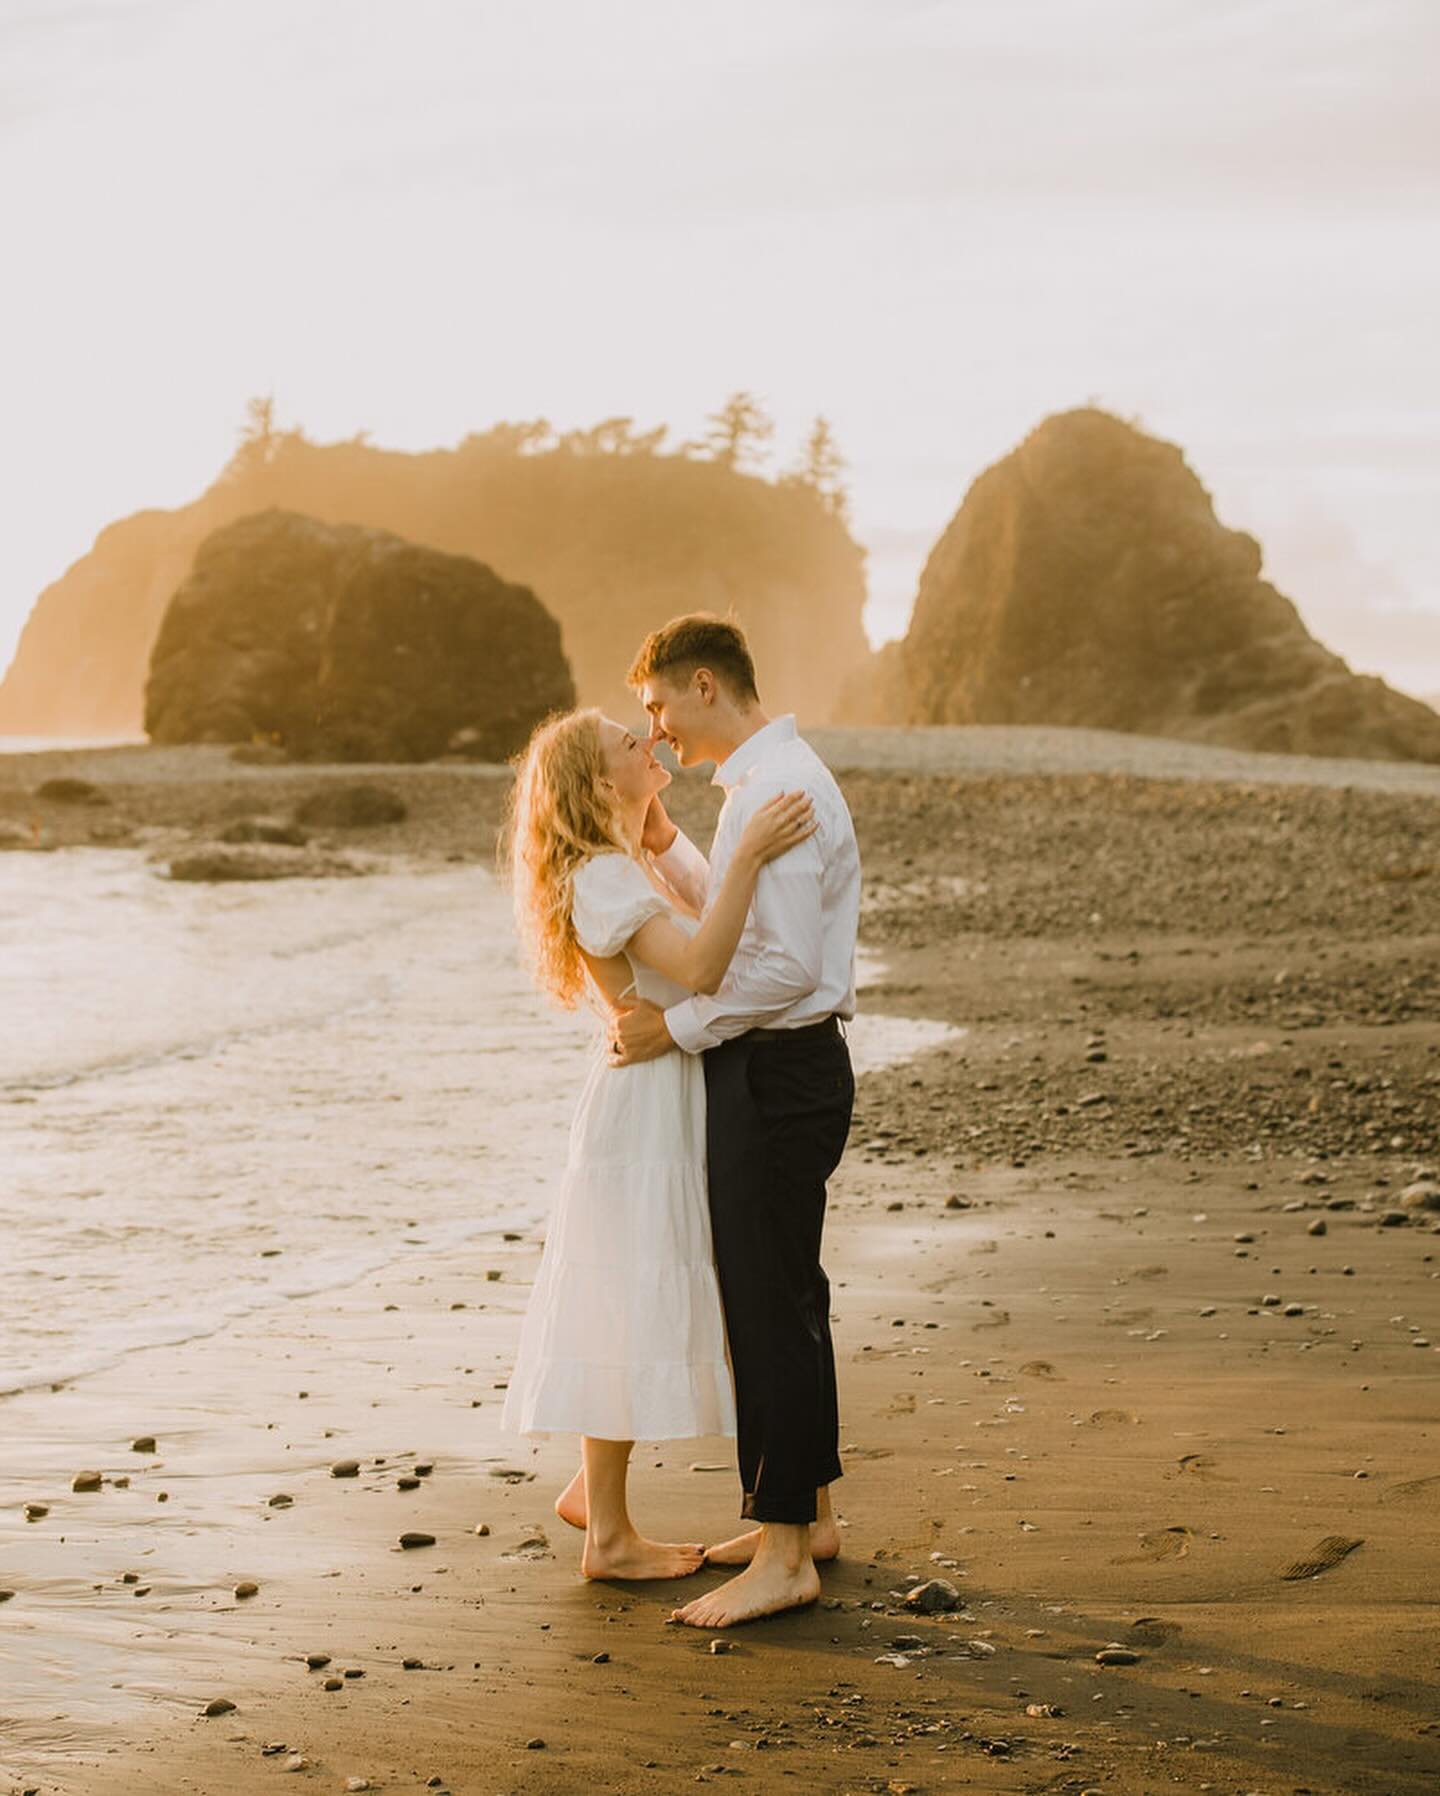 I don&rsquo;t think I&rsquo;ll ever be over this stunning sunset elopement session on the beach 😍